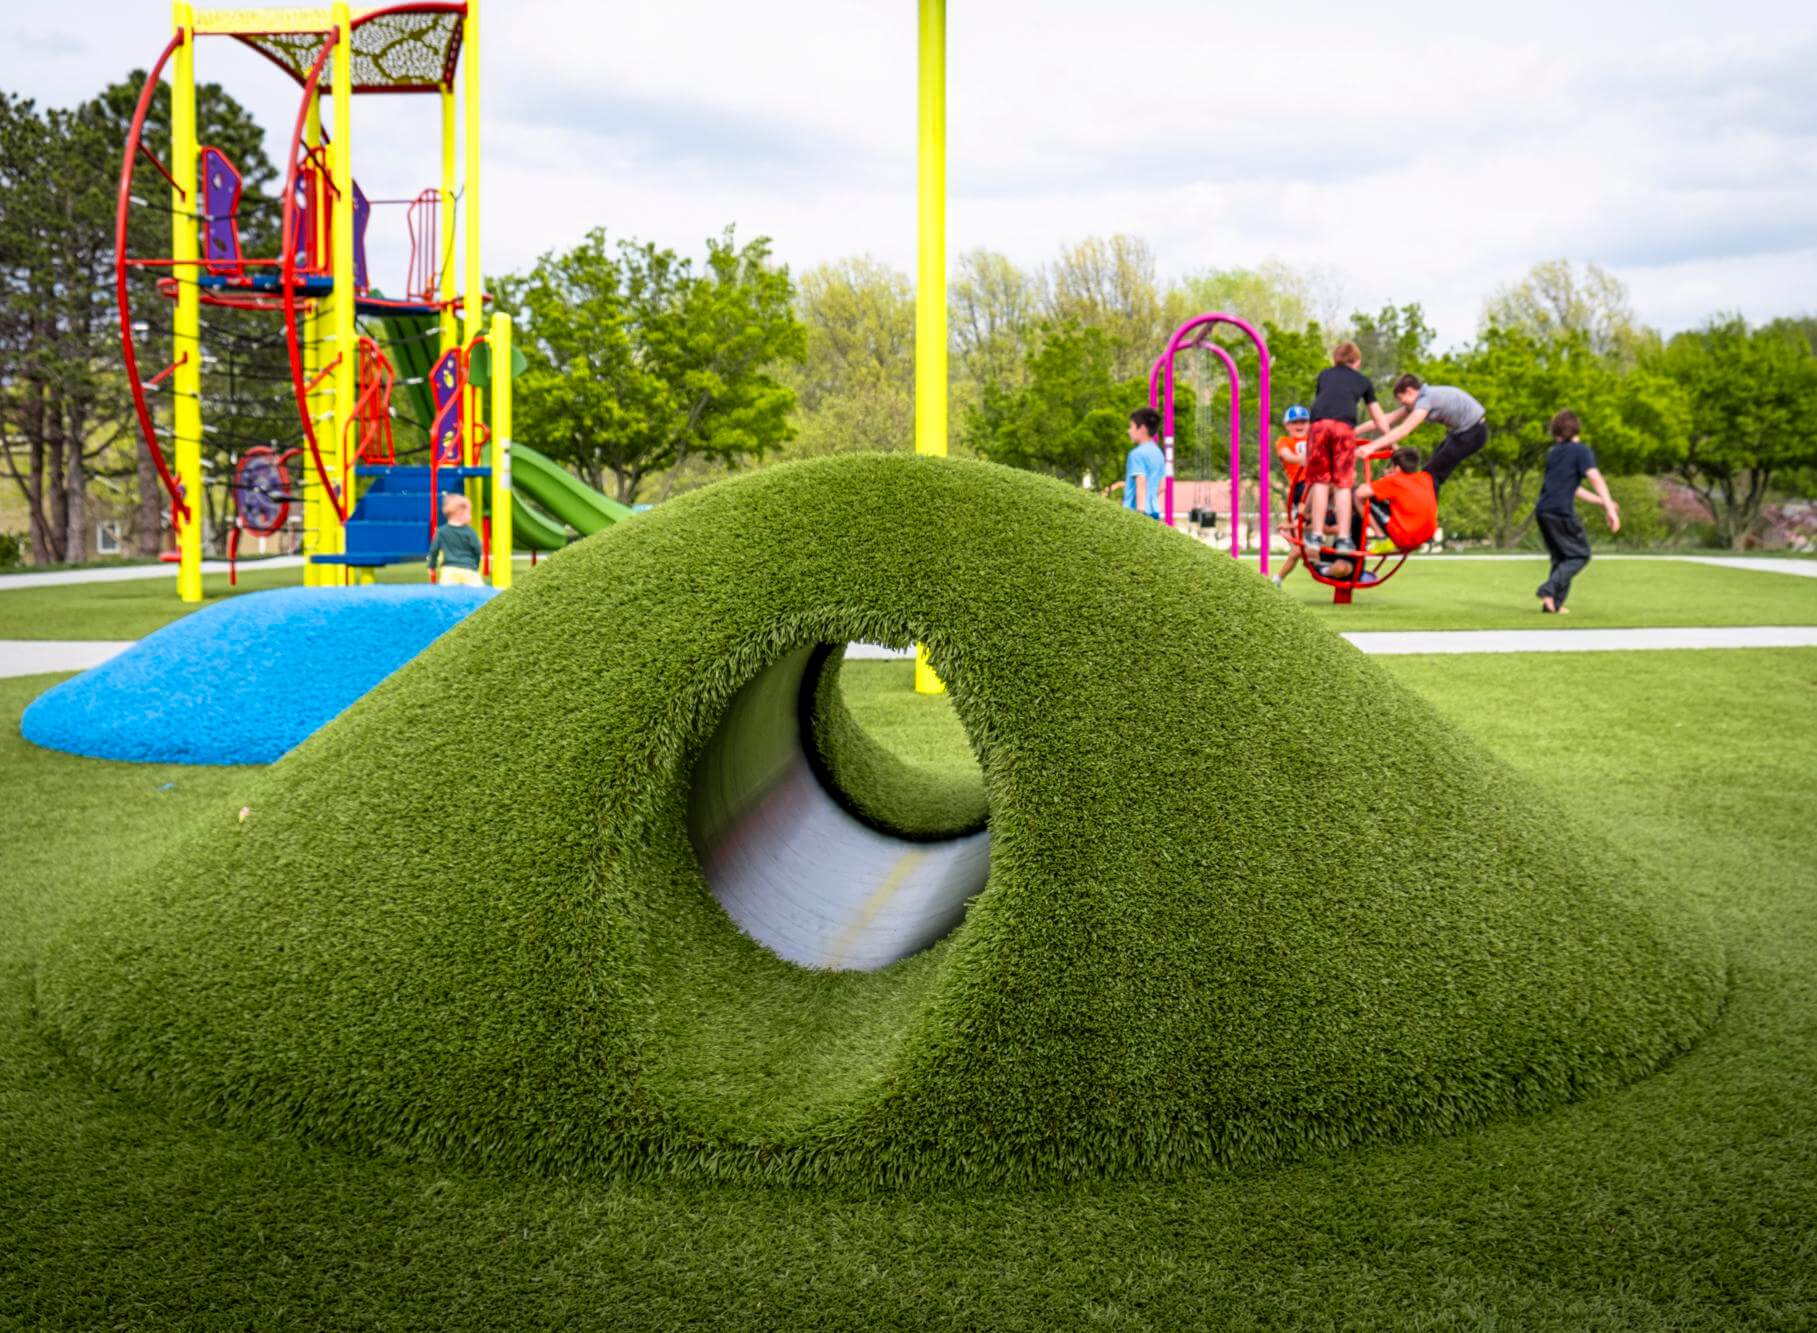 Playground with children on equipment and a dome climber on well-maintained synthetic grass.